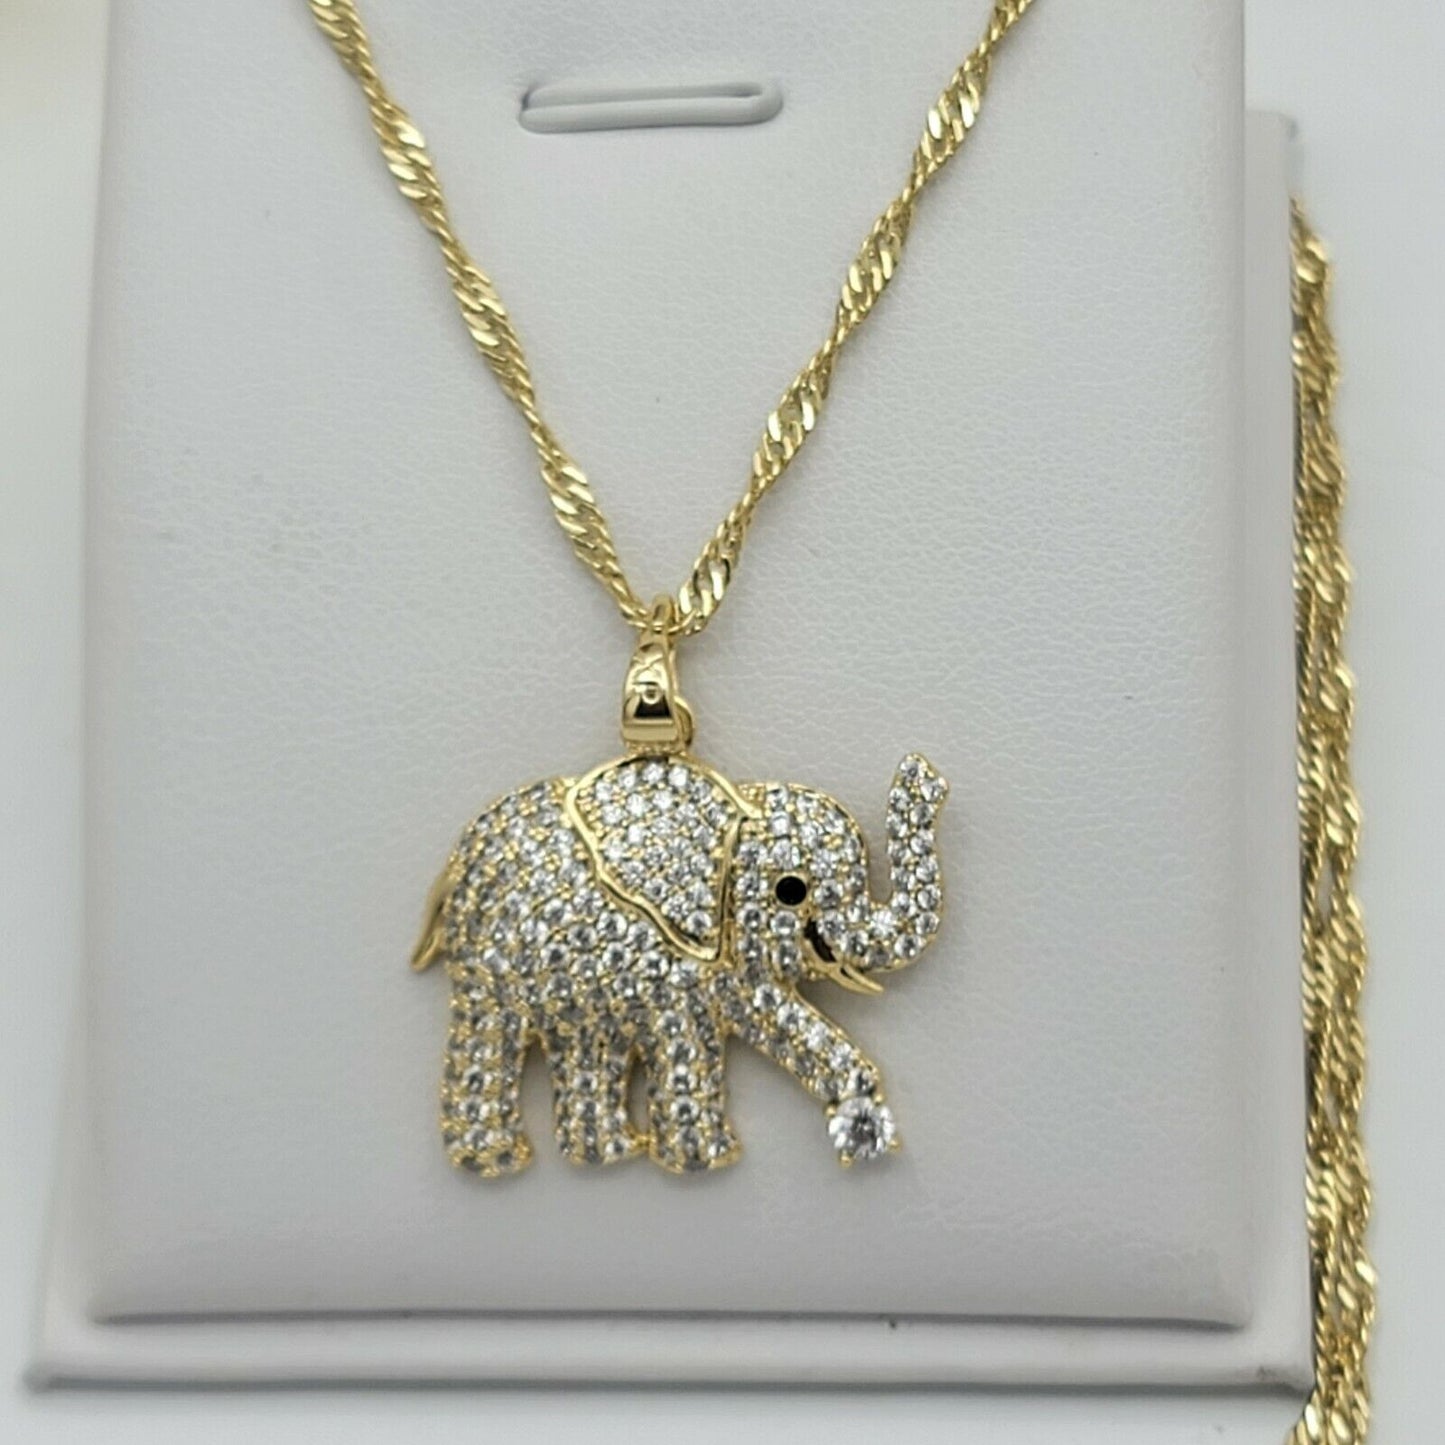 Necklaces - 14K Gold Plated. Elephant with CZ Pendant & Chain.